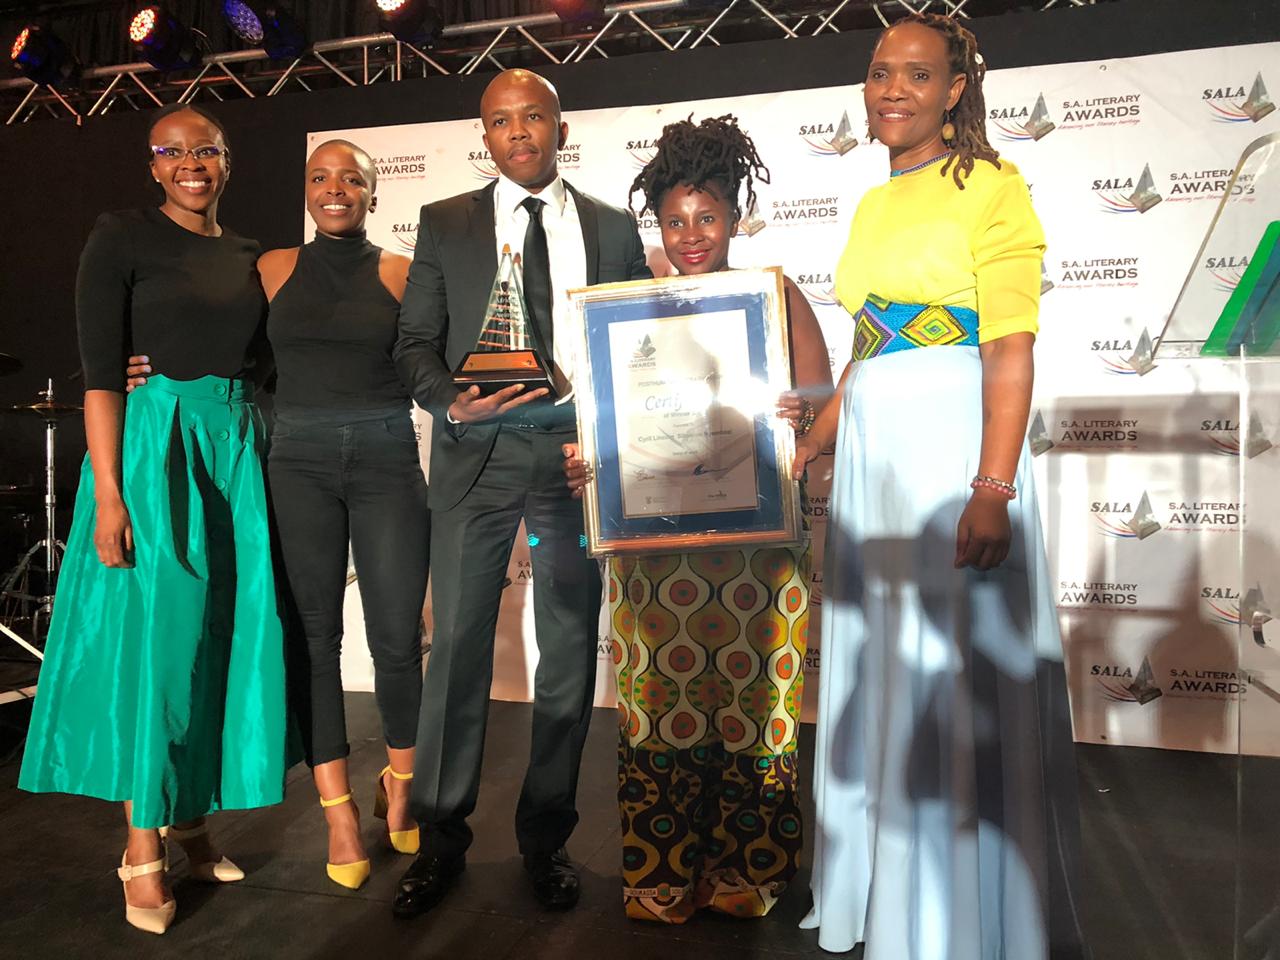 South African Literary Awards 2019 winners announced in Johannesburg.